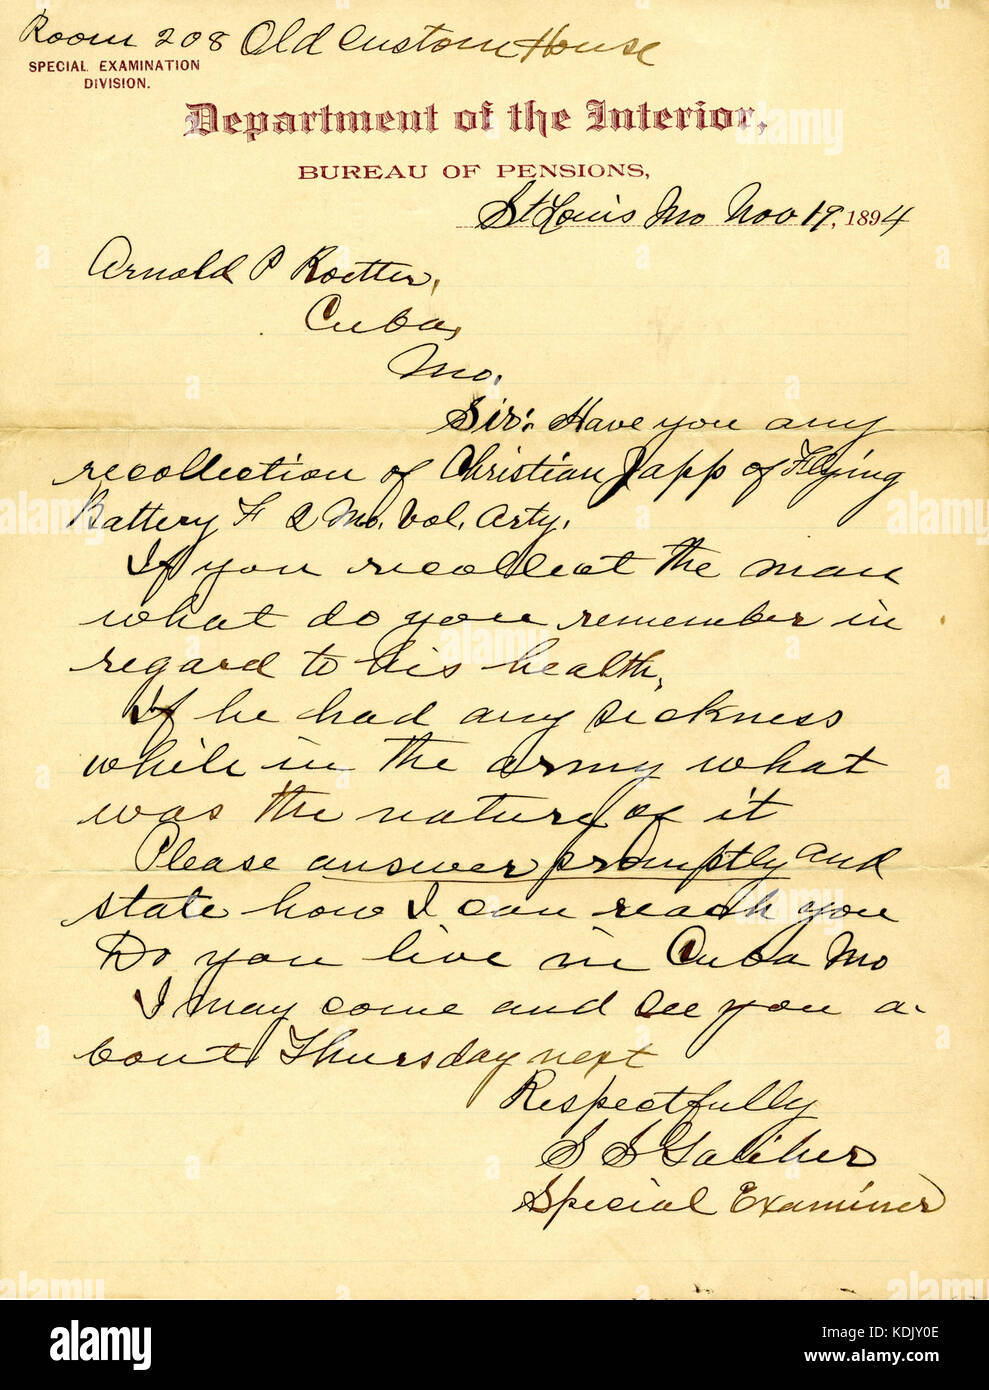 Letter of Department of the Interior, Bureau of Pensions, St. Louis, Mo.,  to Arnold P. Roetter, Cuba, Mo., November 19, 1894 Stock Photo - Alamy